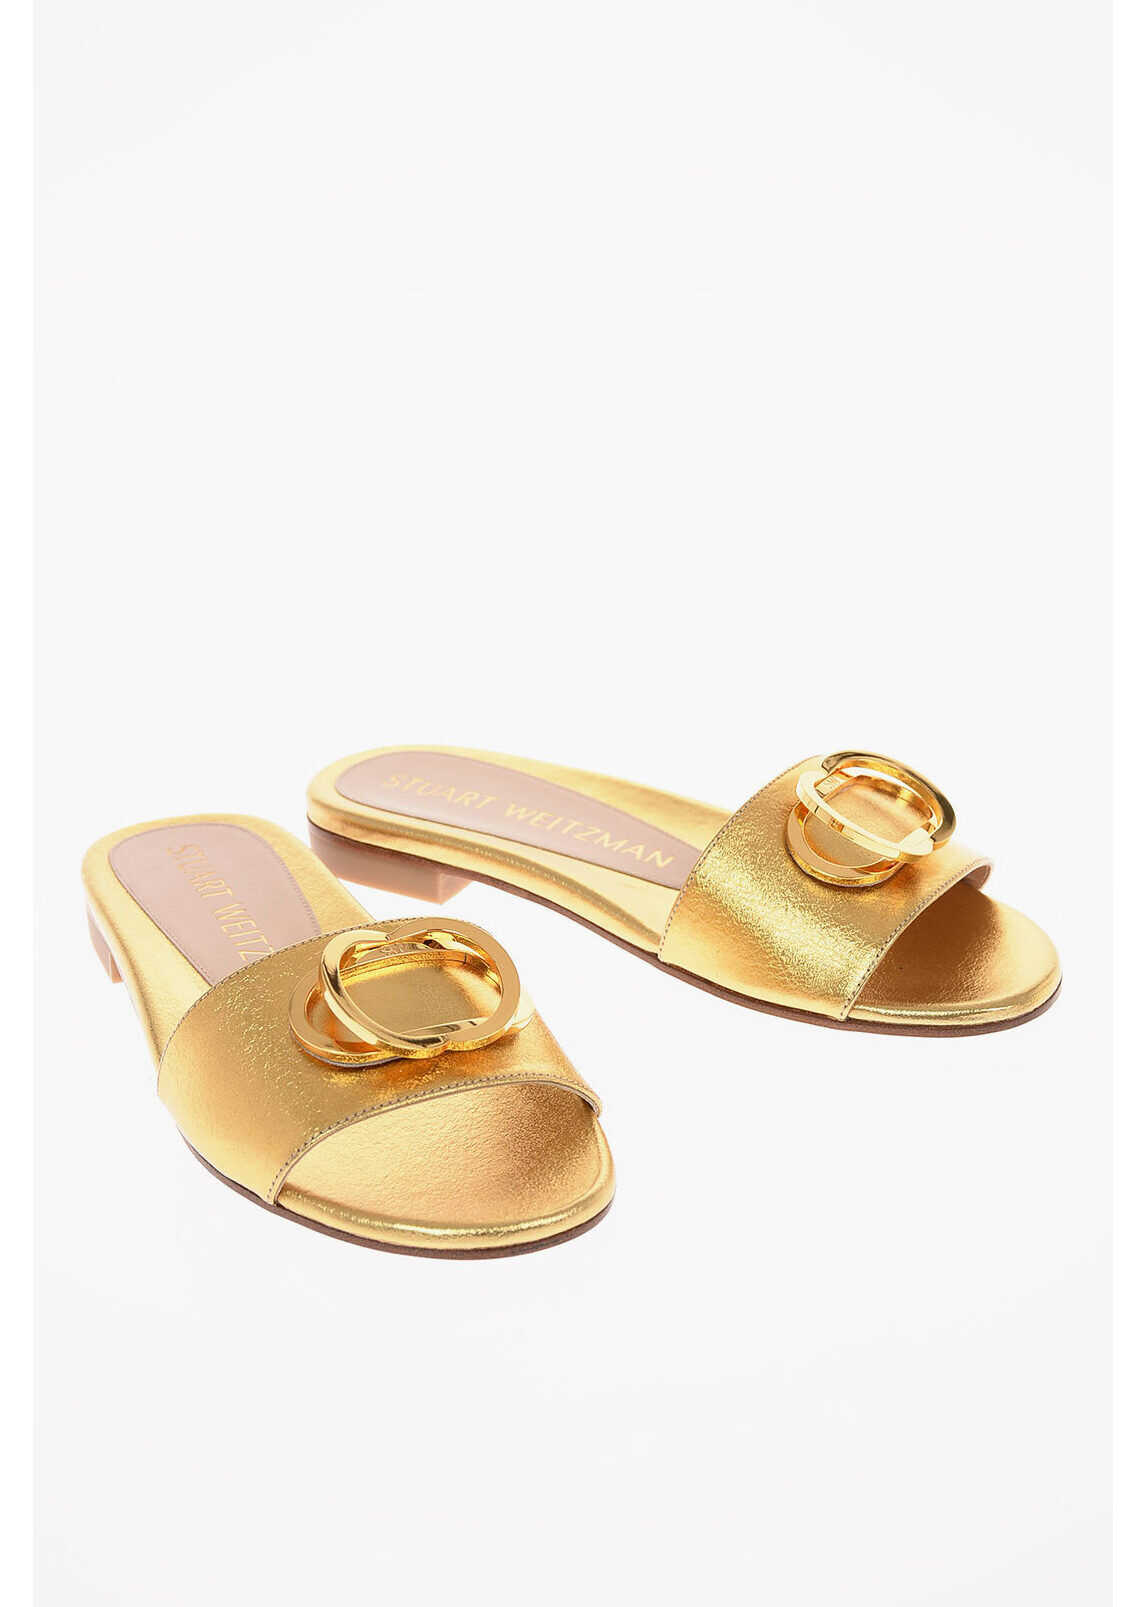 Stuart Weitzman Metallic Soft Leather Caicos Slippers With Jewel Application Gold